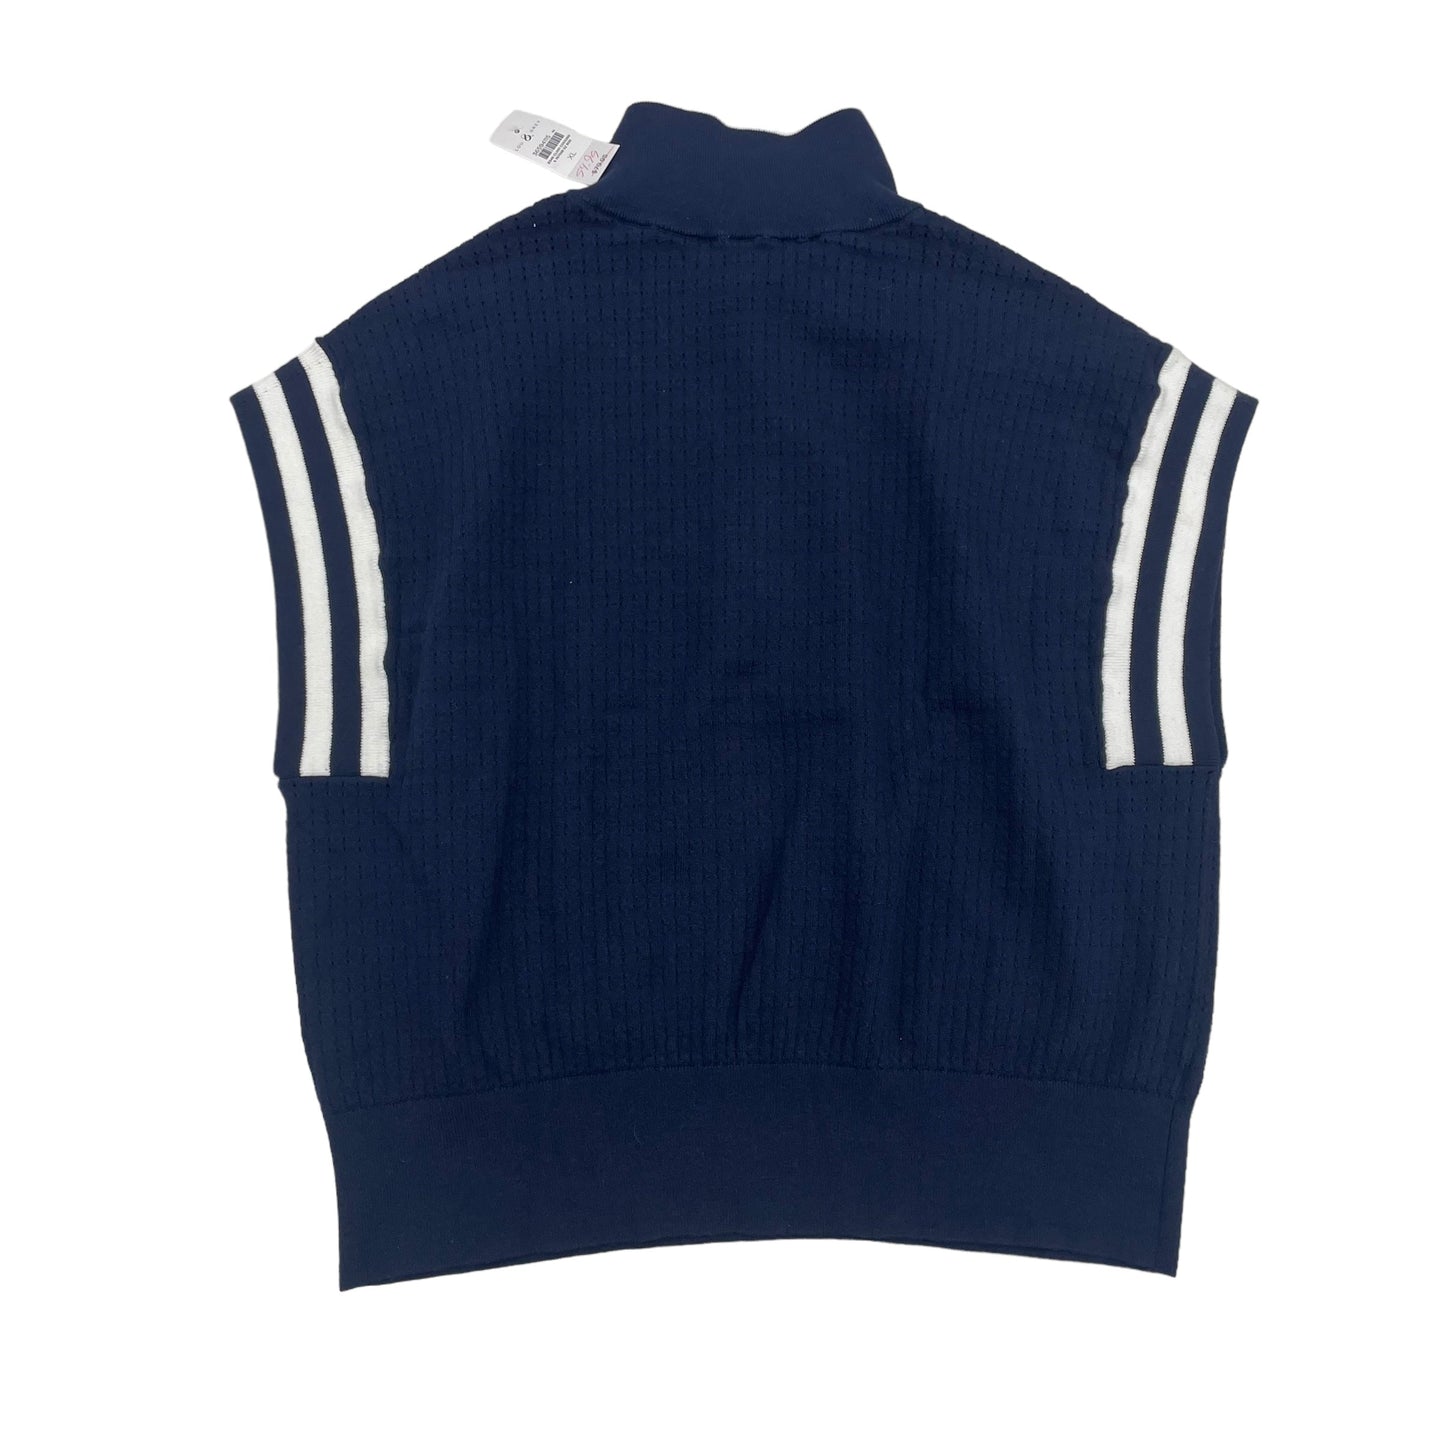 NAVY LOU AND GREY SWEATER SS, Size XL